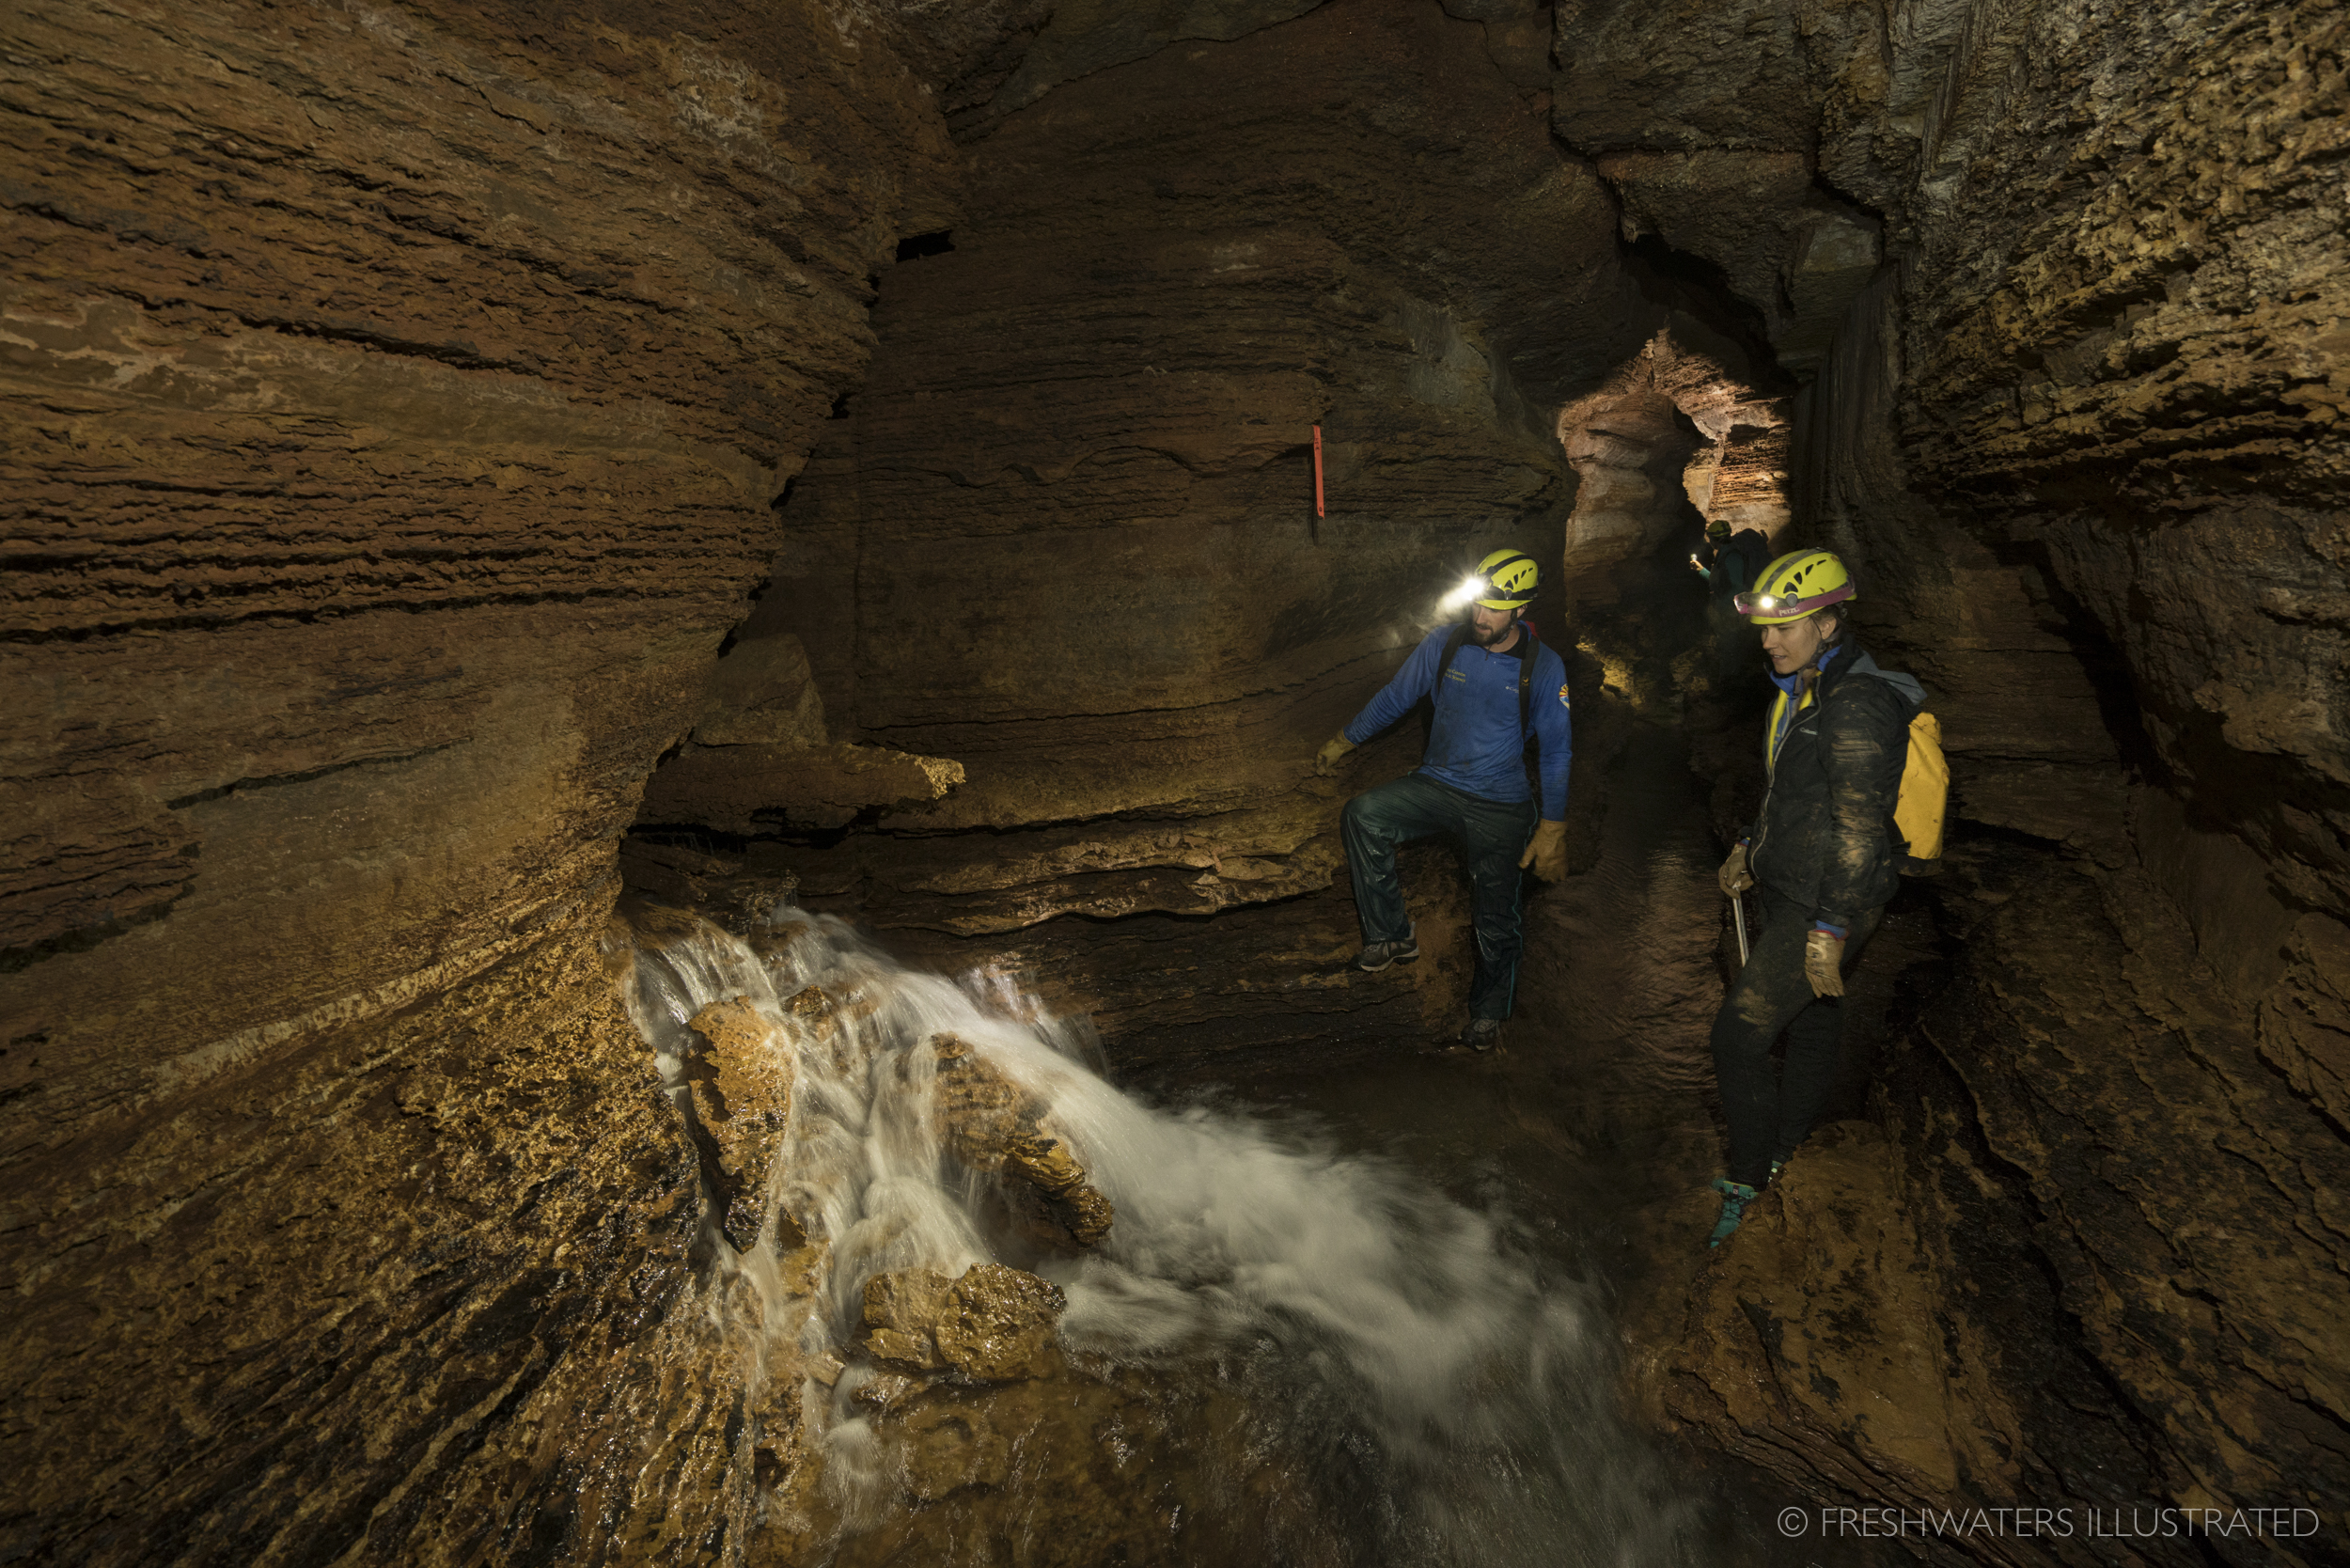  Traveling deep into layers of ancient rock, a team of Park Service hydrologists explore a labyrinth of underground streams far below the Grand Canyon's North Rim. These flowing waters eventually feed springs within the canyon, which are crucial to m